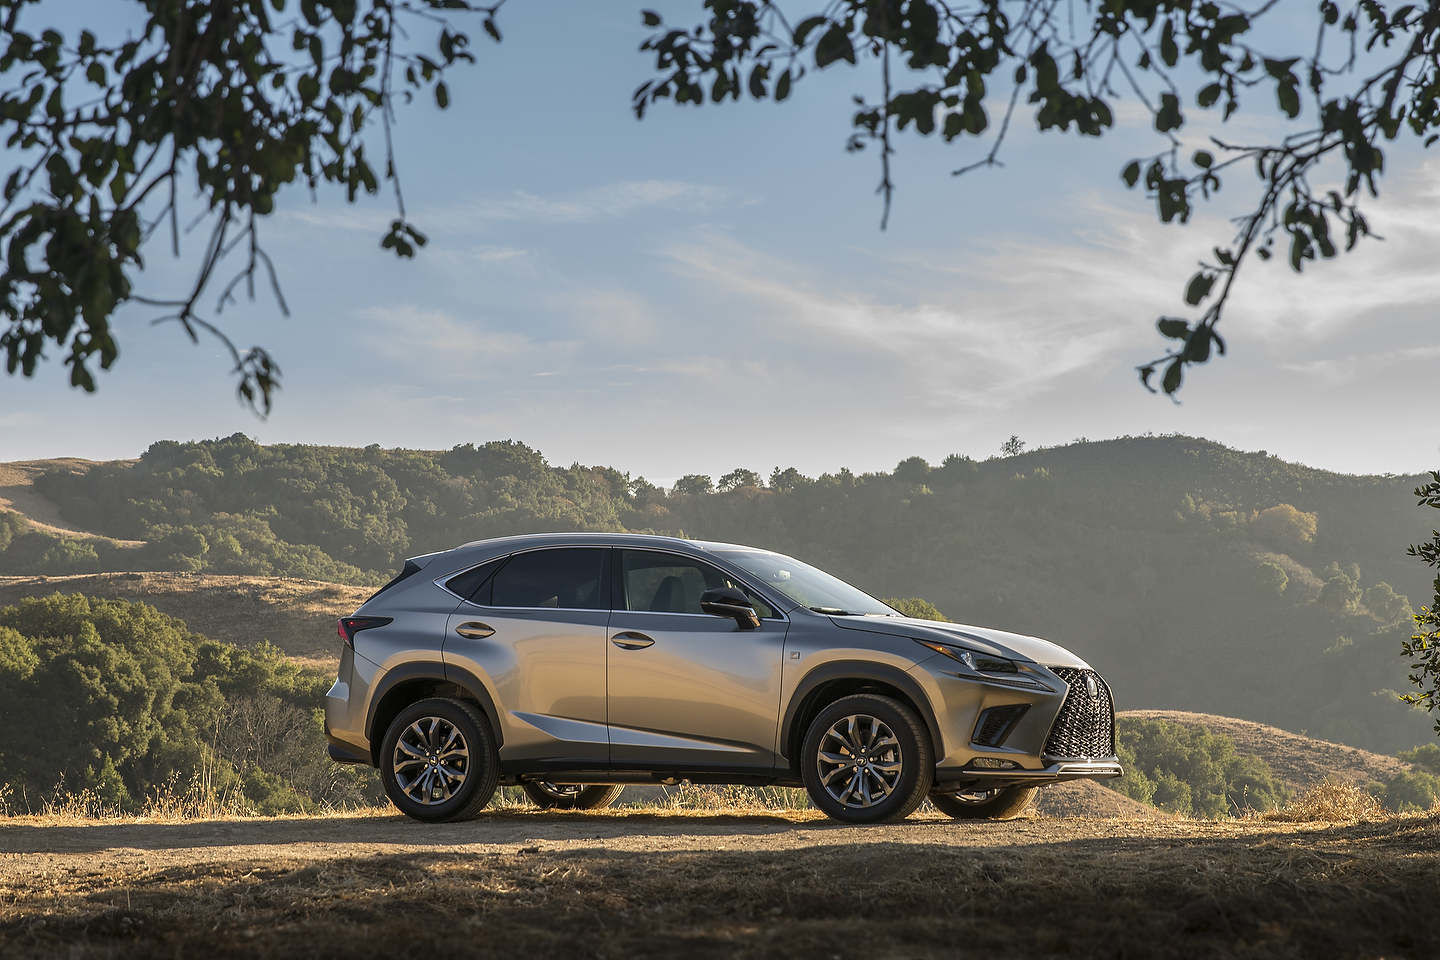 Why should you consider a pre-owned Lexus NX?